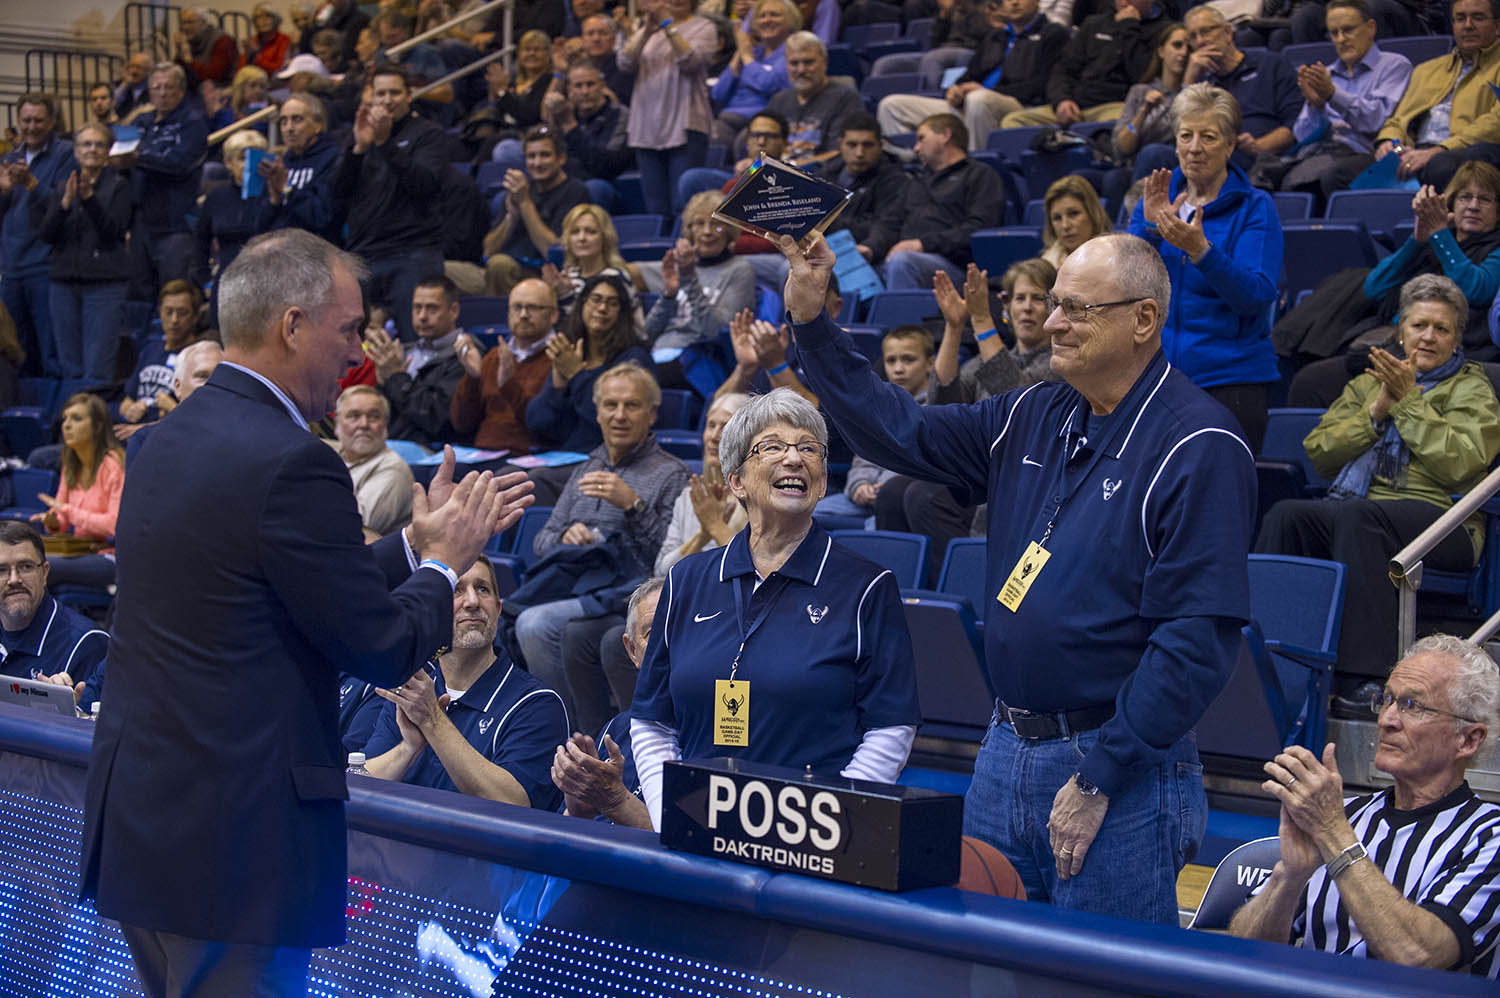 John and Brenda Riseland are applauded by WWU AD Steve Card and former AD Lynda Goodrich (in the background).